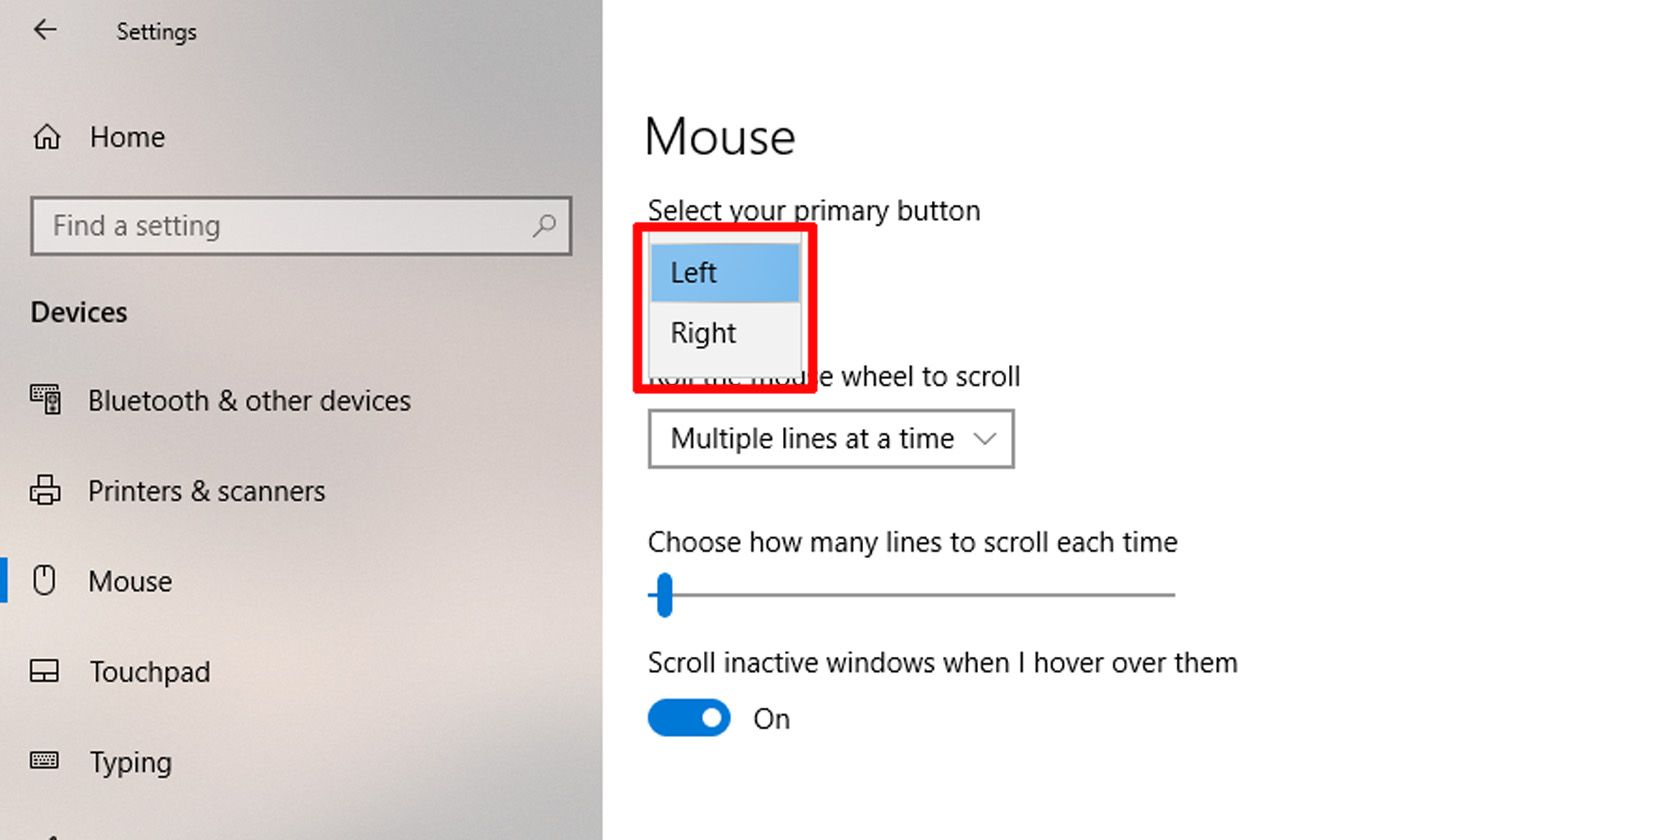 Switching primary mouse button in Windows 10